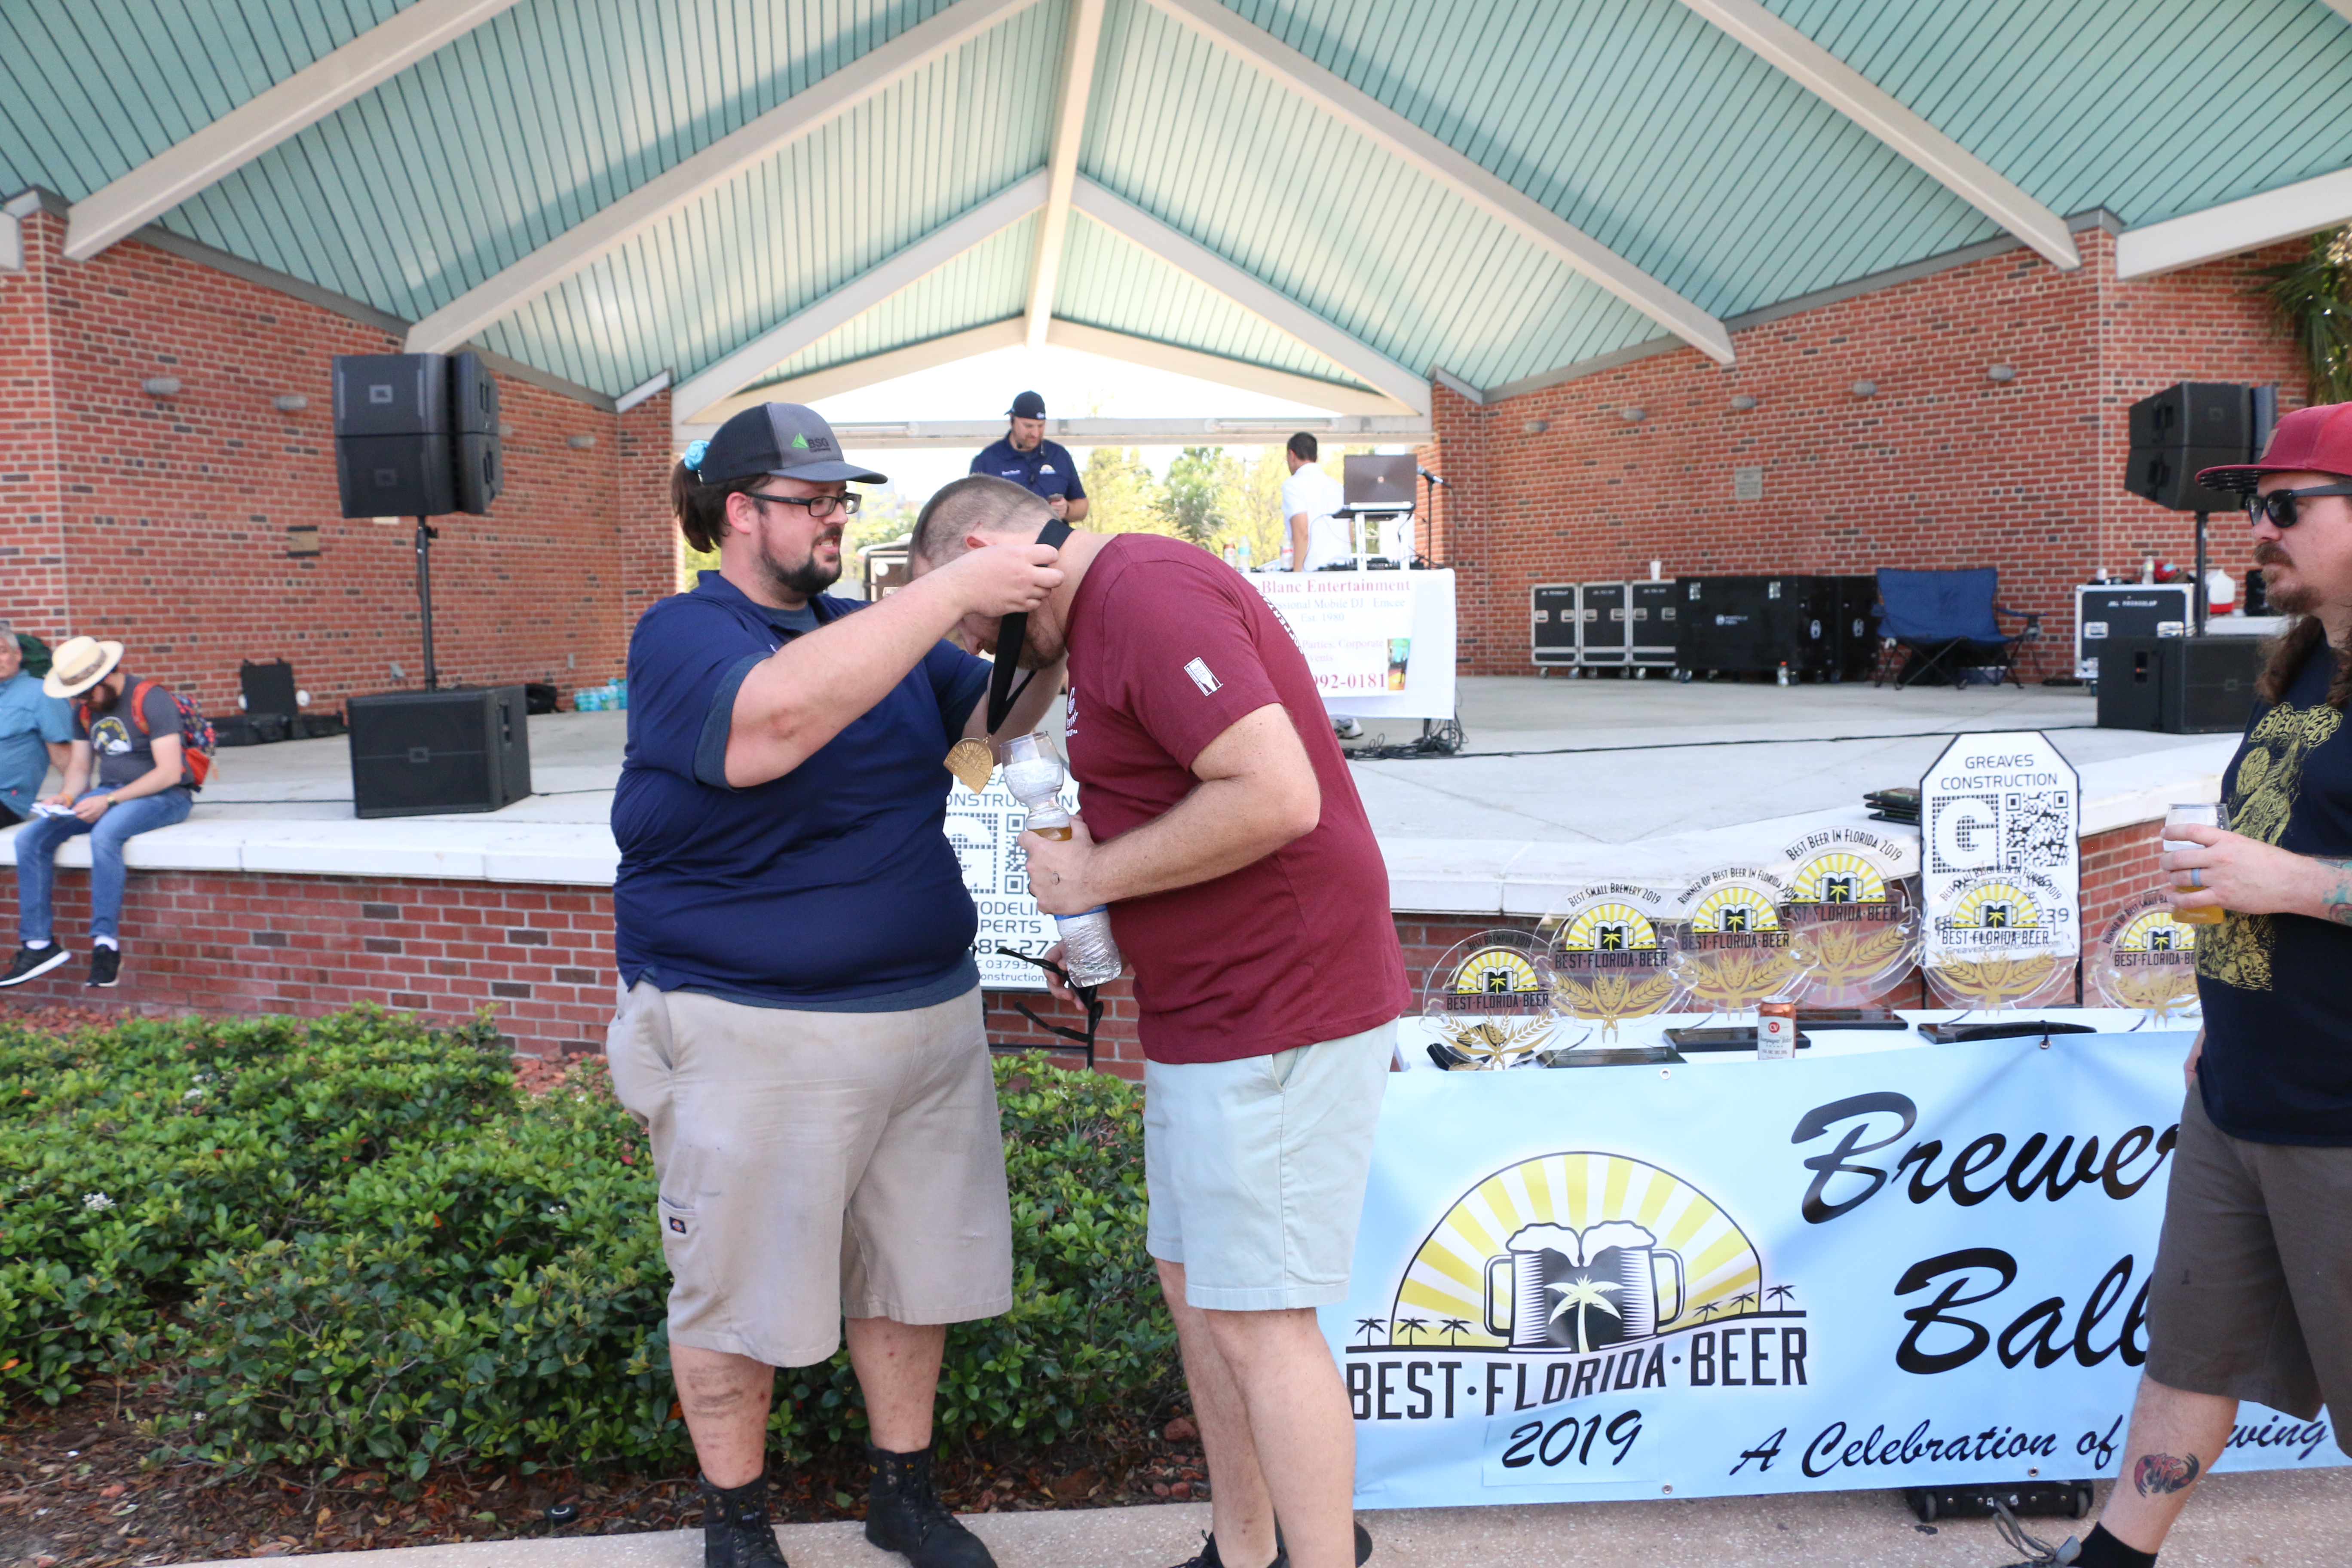 Coppertail Brewing's Casey Hughes accepts a medal at 2019 Brewers Ball Best Florida Beer Competition